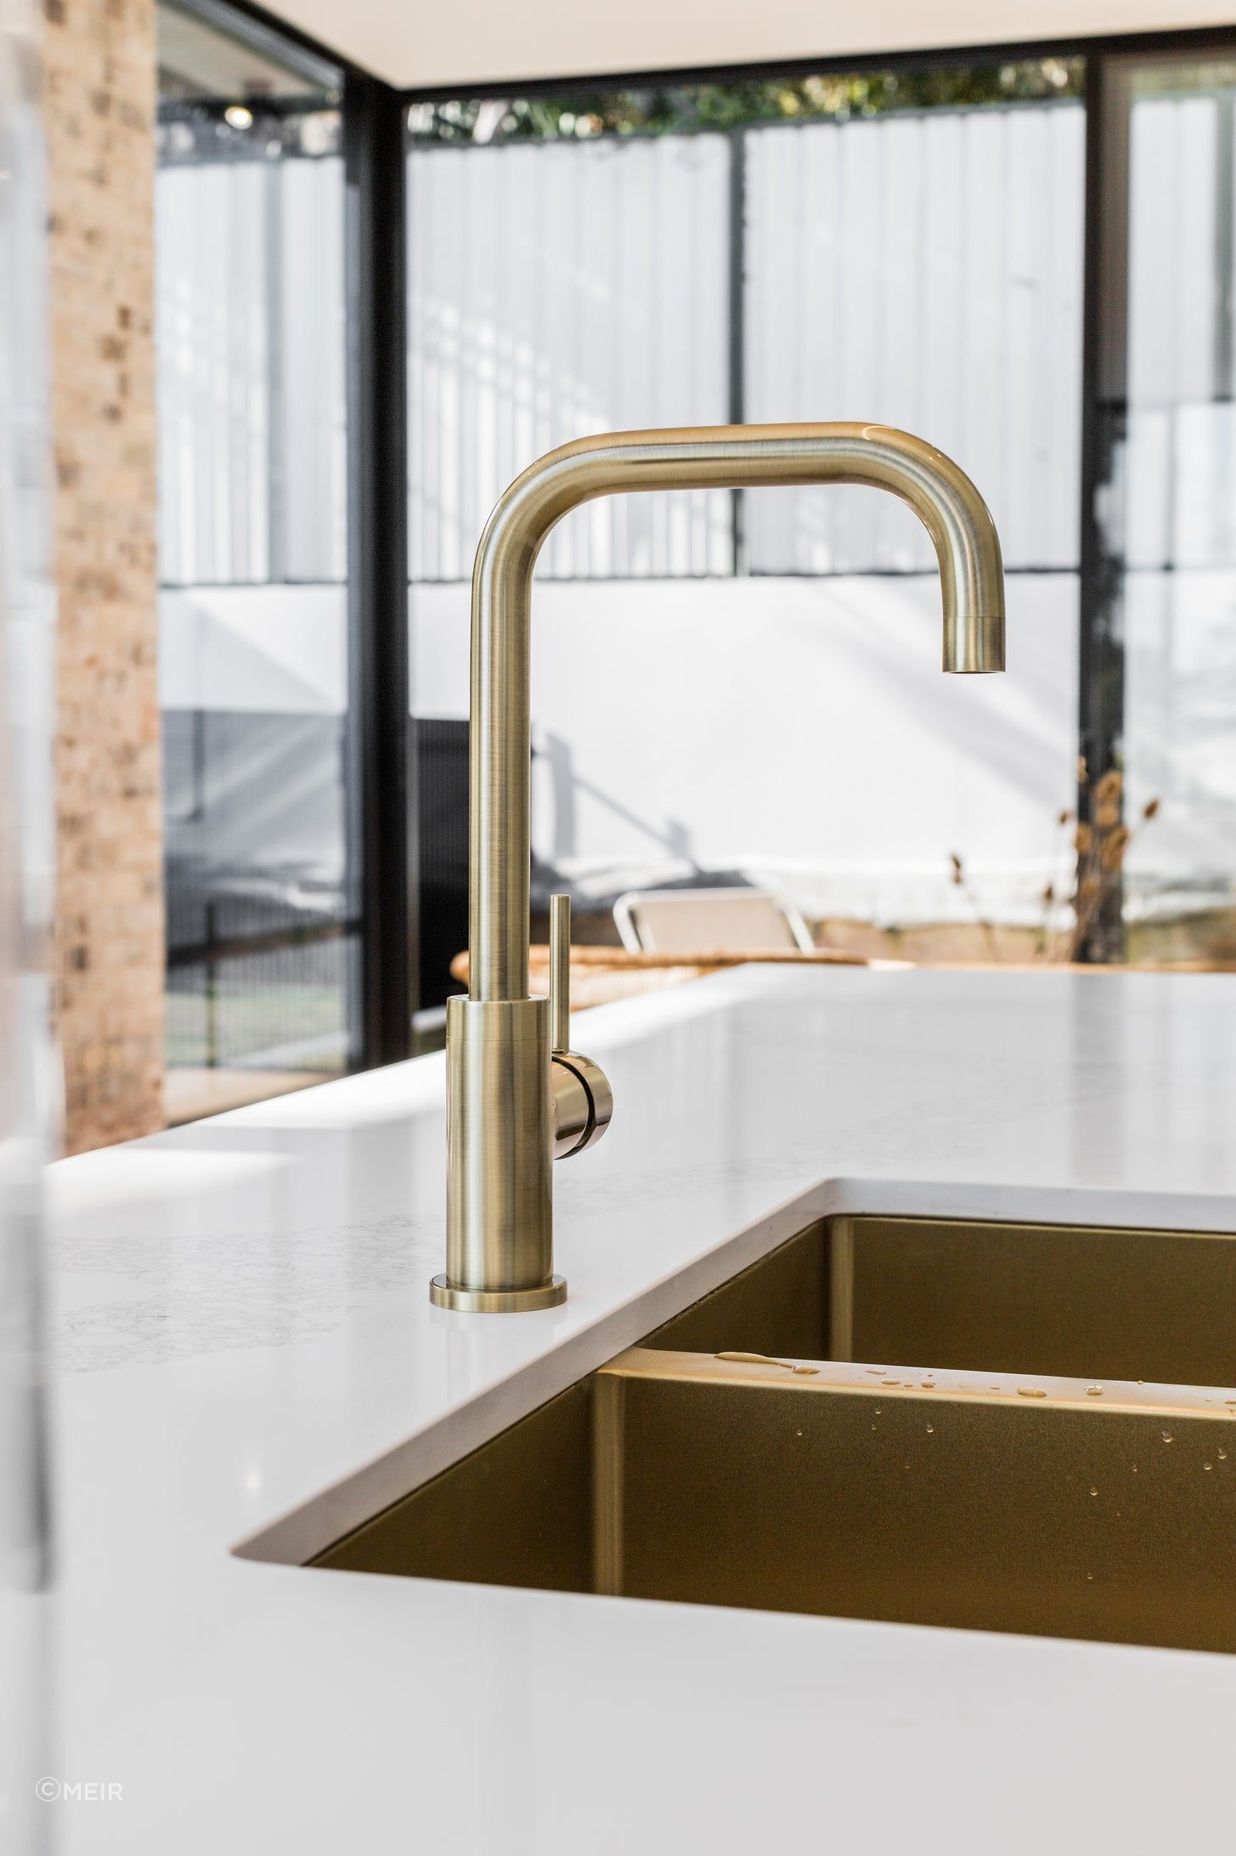 Mixer taps come in a variety of modern, stylish finishes.